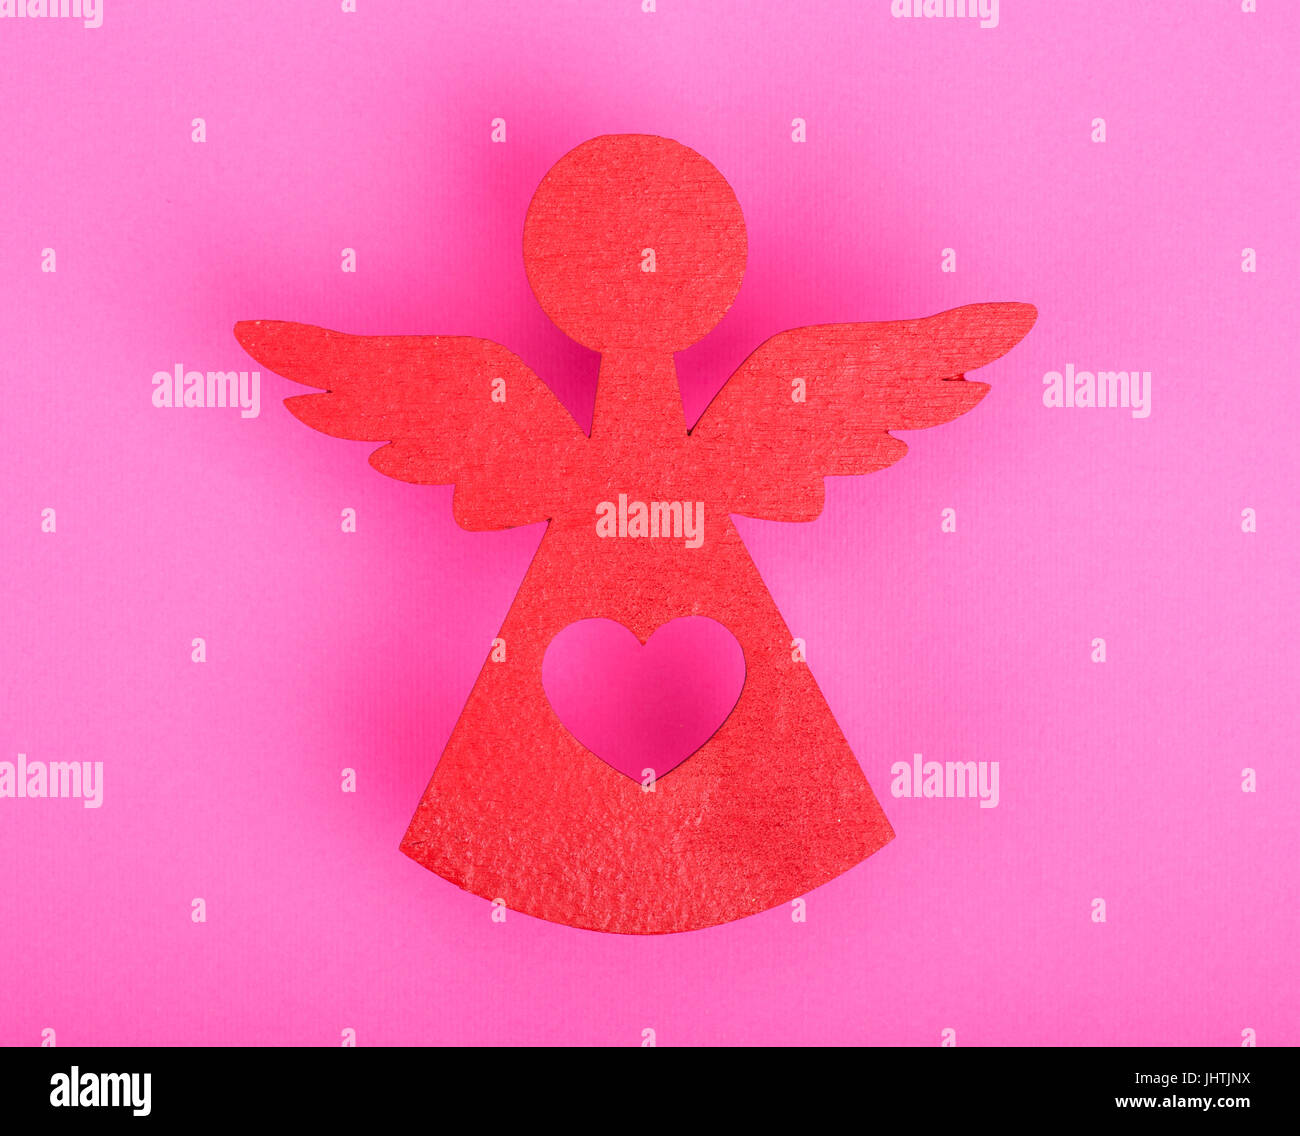 Christmas decorations of red angel on a pink background Stock Photo